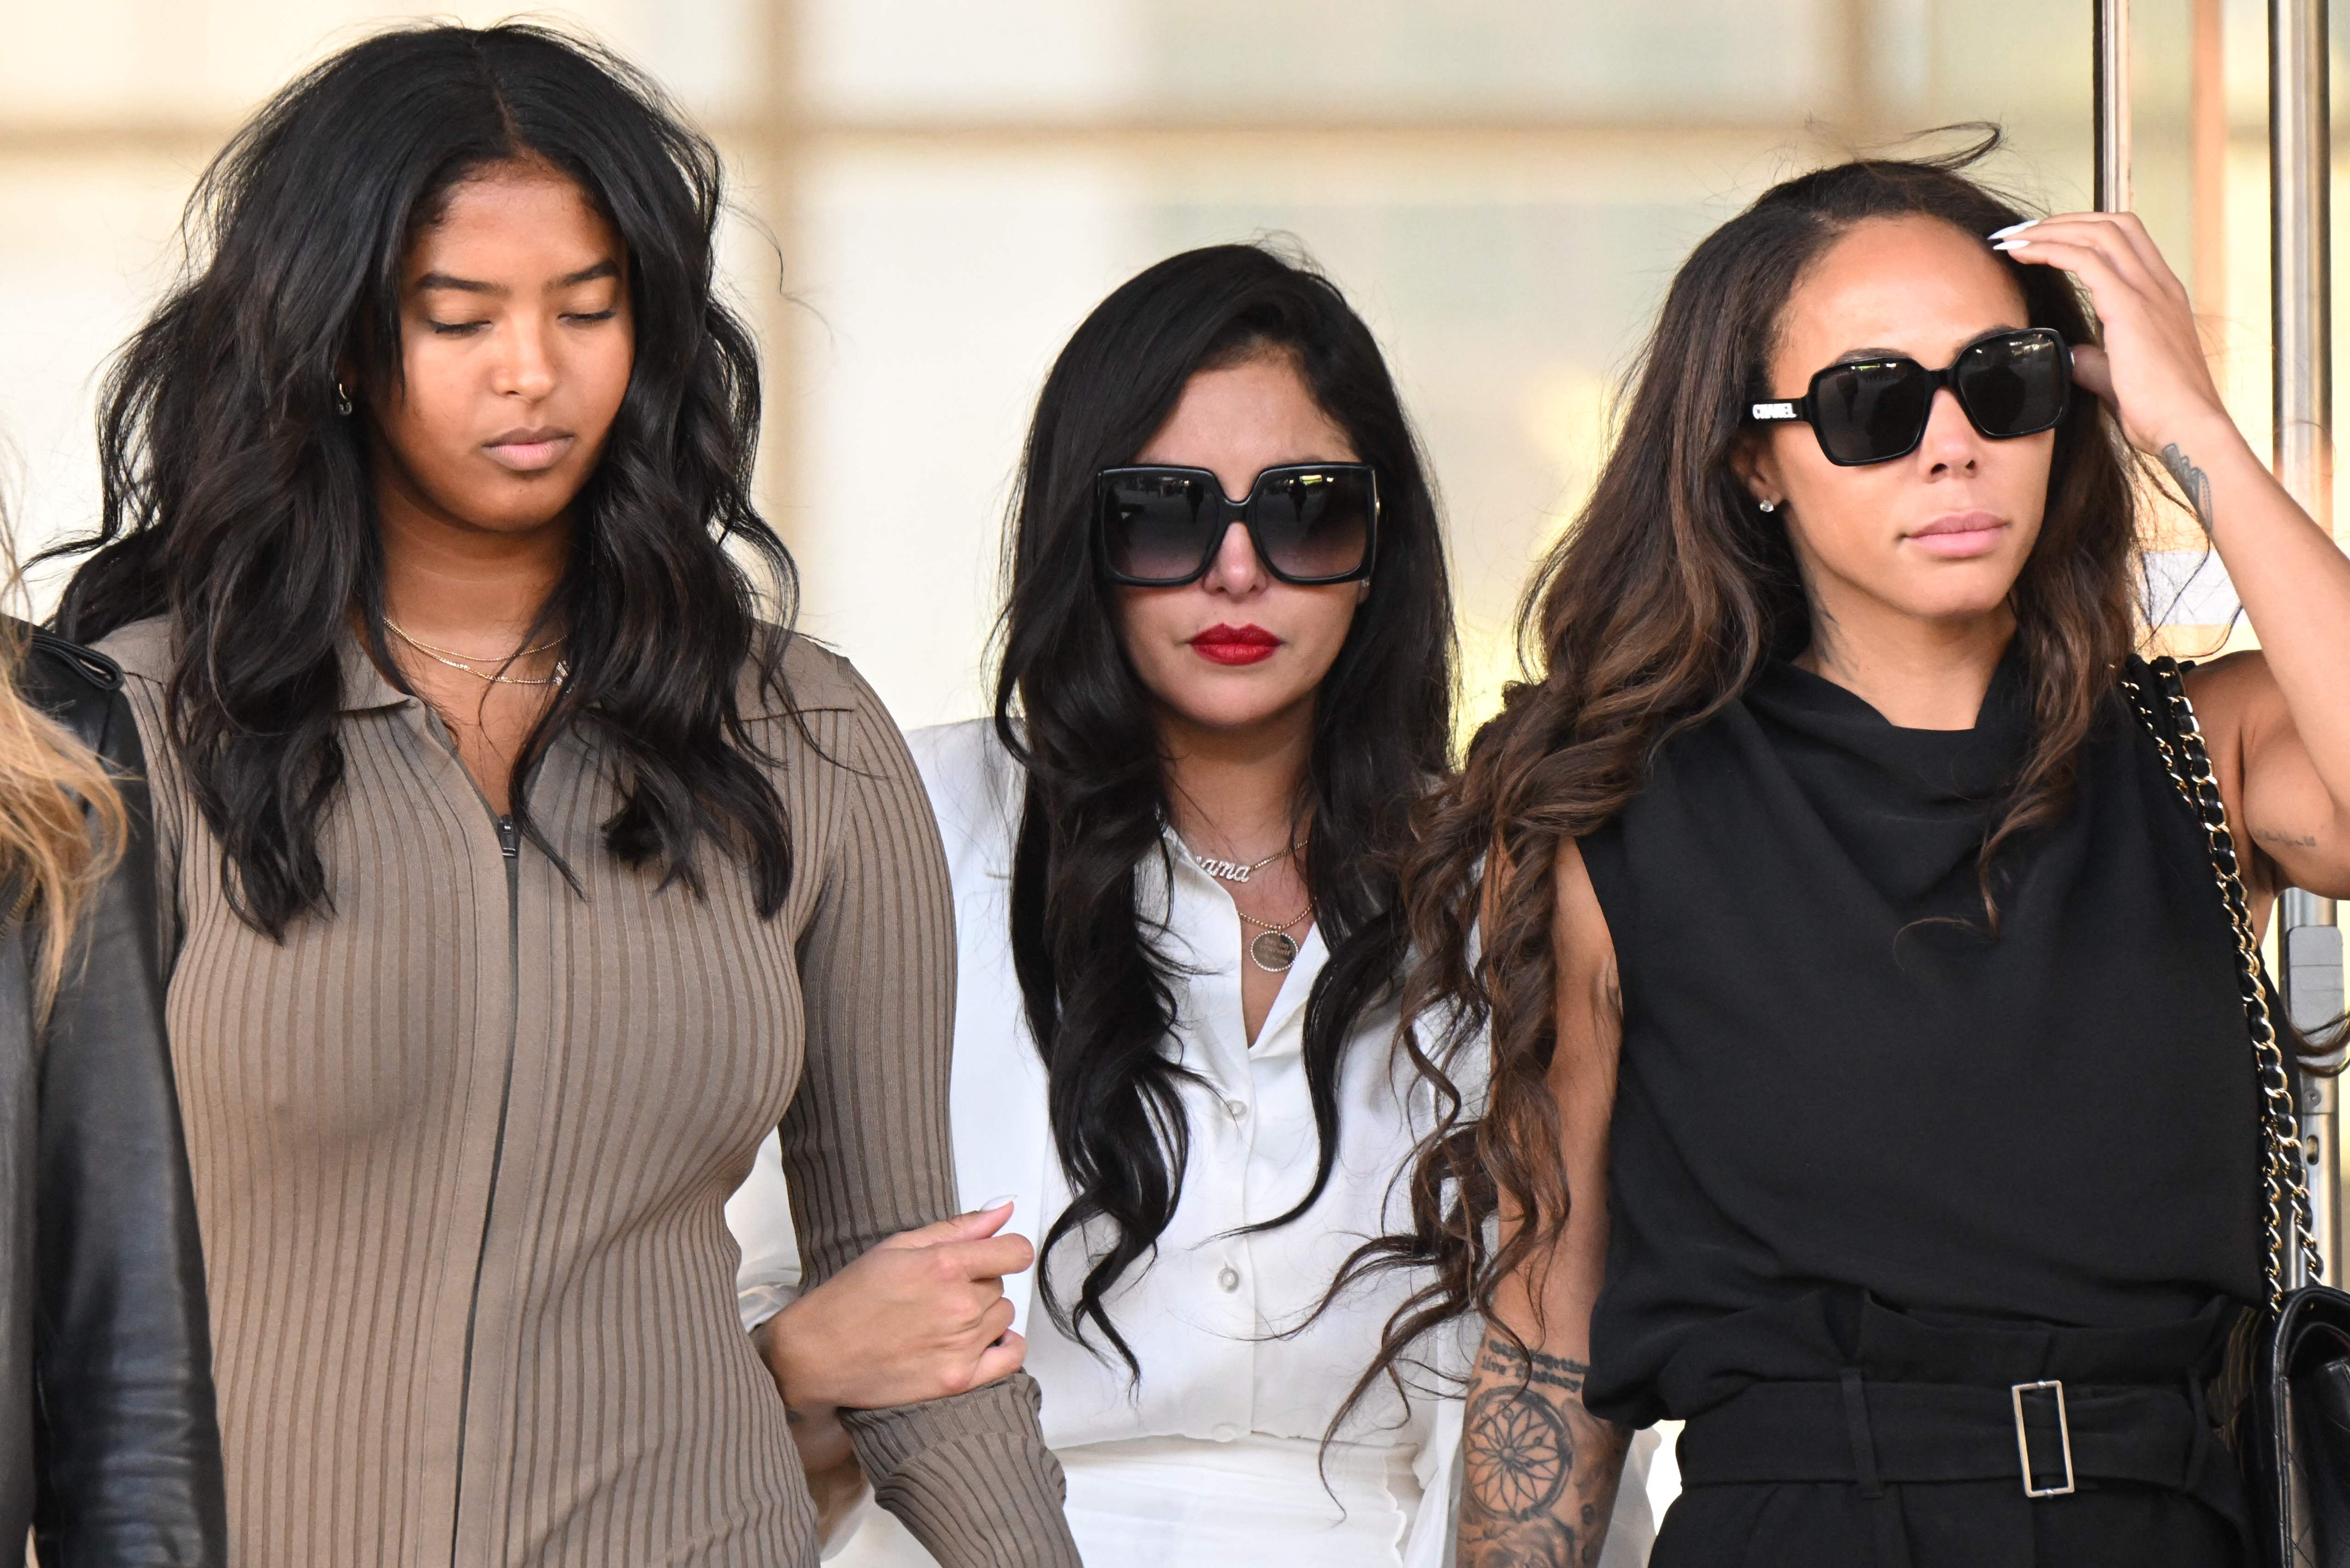 Vanessa Bryant, centre, her daughter Natalia Bryant, left, and close friend Sydney Leroux leave the court house in Los Angeles after the verdict was reached